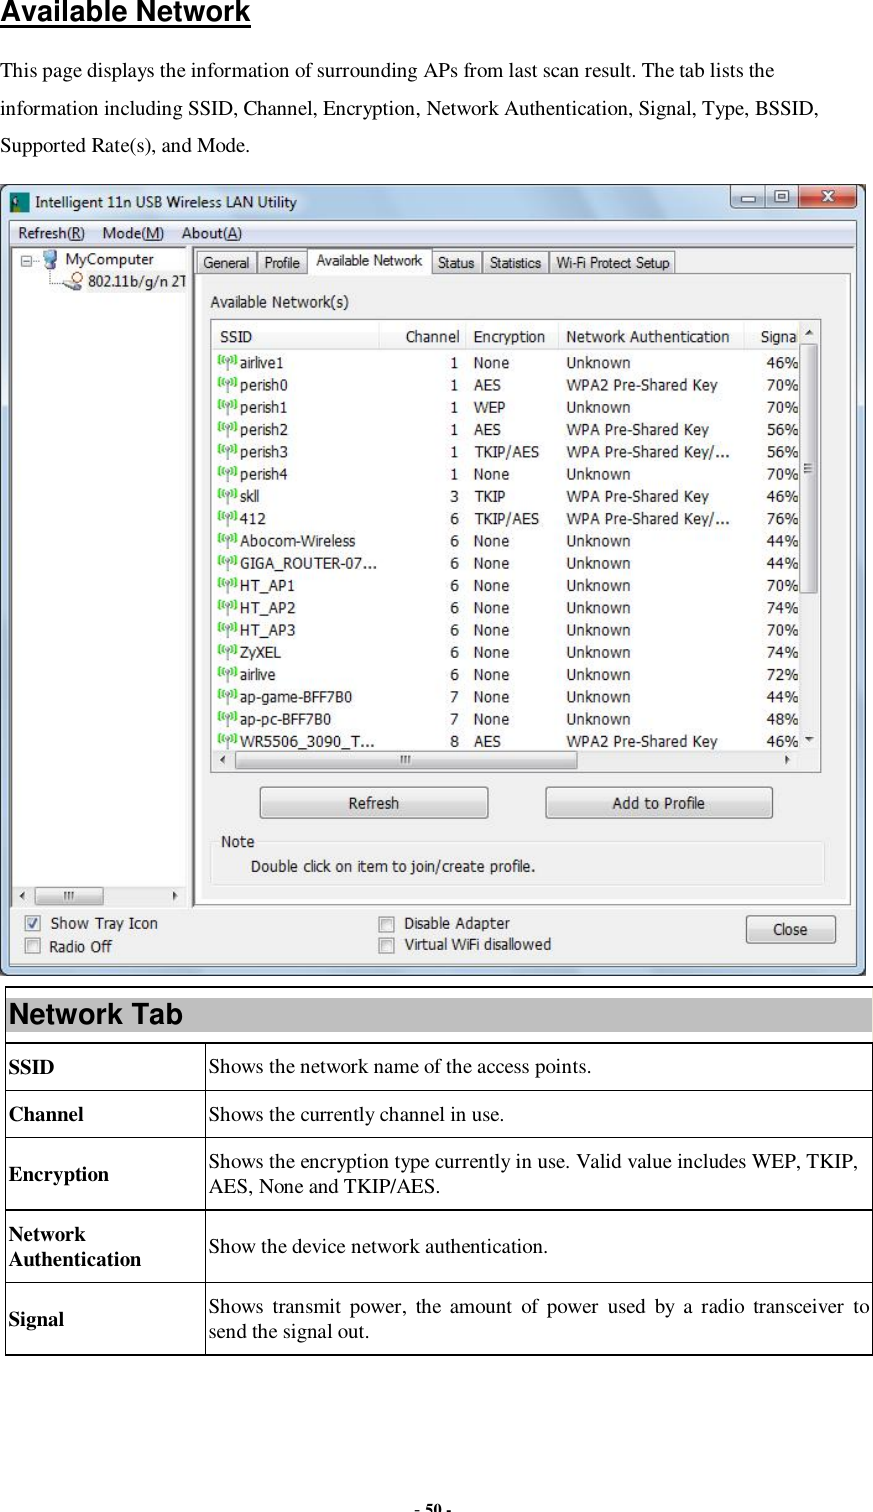  - 50 -  Available Network This page displays the information of surrounding APs from last scan result. The tab lists the information including SSID, Channel, Encryption, Network Authentication, Signal, Type, BSSID, Supported Rate(s), and Mode.  Network Tab SSID  Shows the network name of the access points. Channel  Shows the currently channel in use. Encryption  Shows the encryption type currently in use. Valid value includes WEP, TKIP, AES, None and TKIP/AES. Network Authentication  Show the device network authentication. Signal  Shows transmit power, the amount of power used by a radio transceiver to send the signal out. 